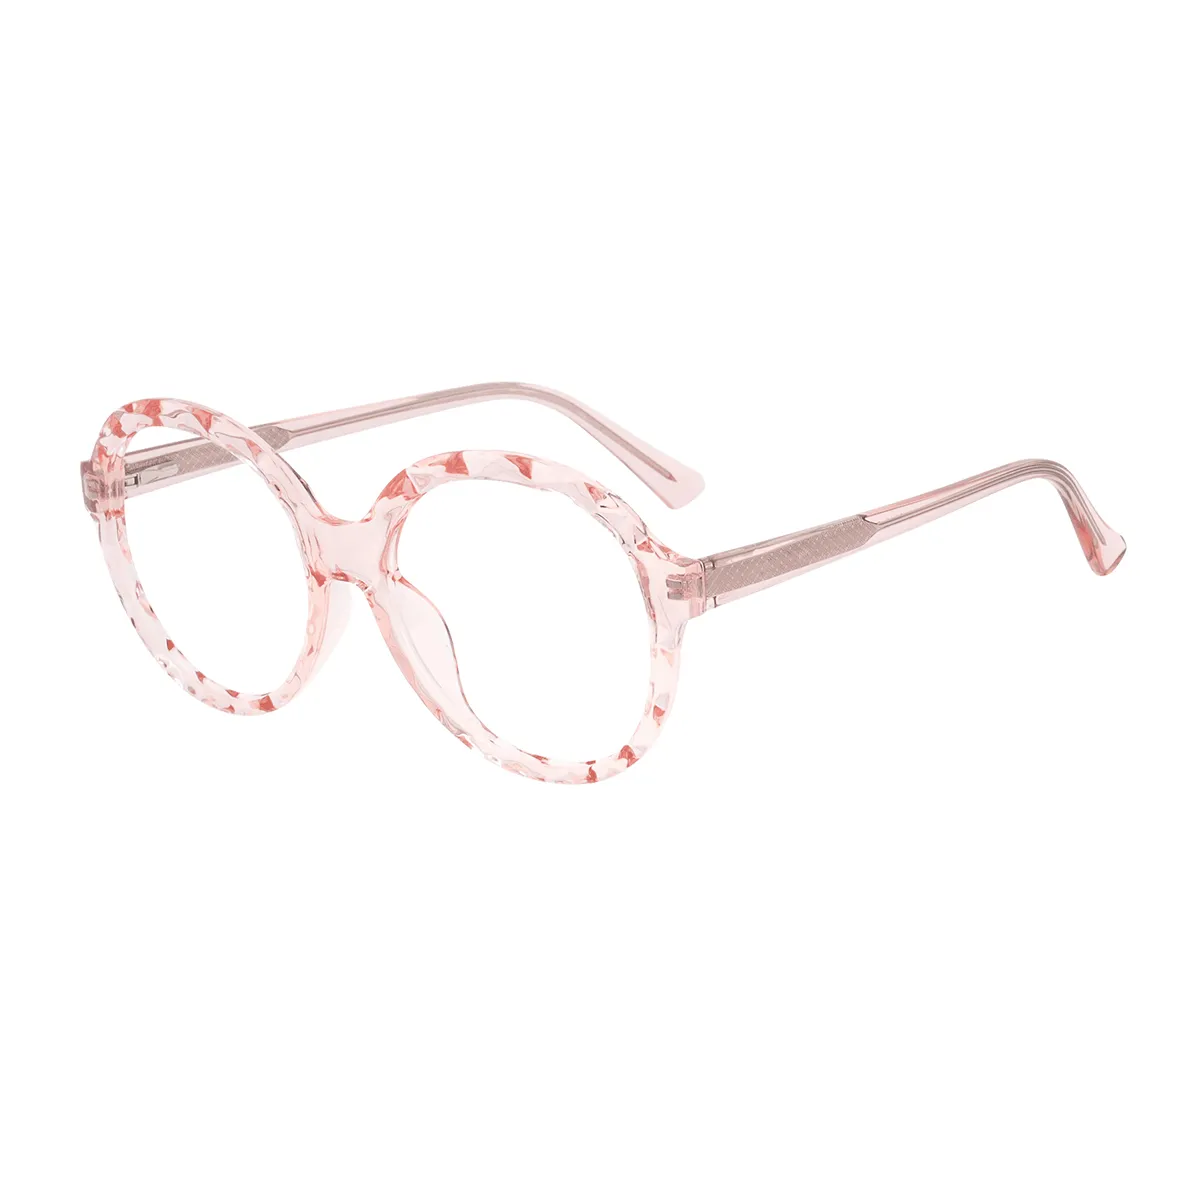 Fashion Round Transparent-pink Glasses for Women